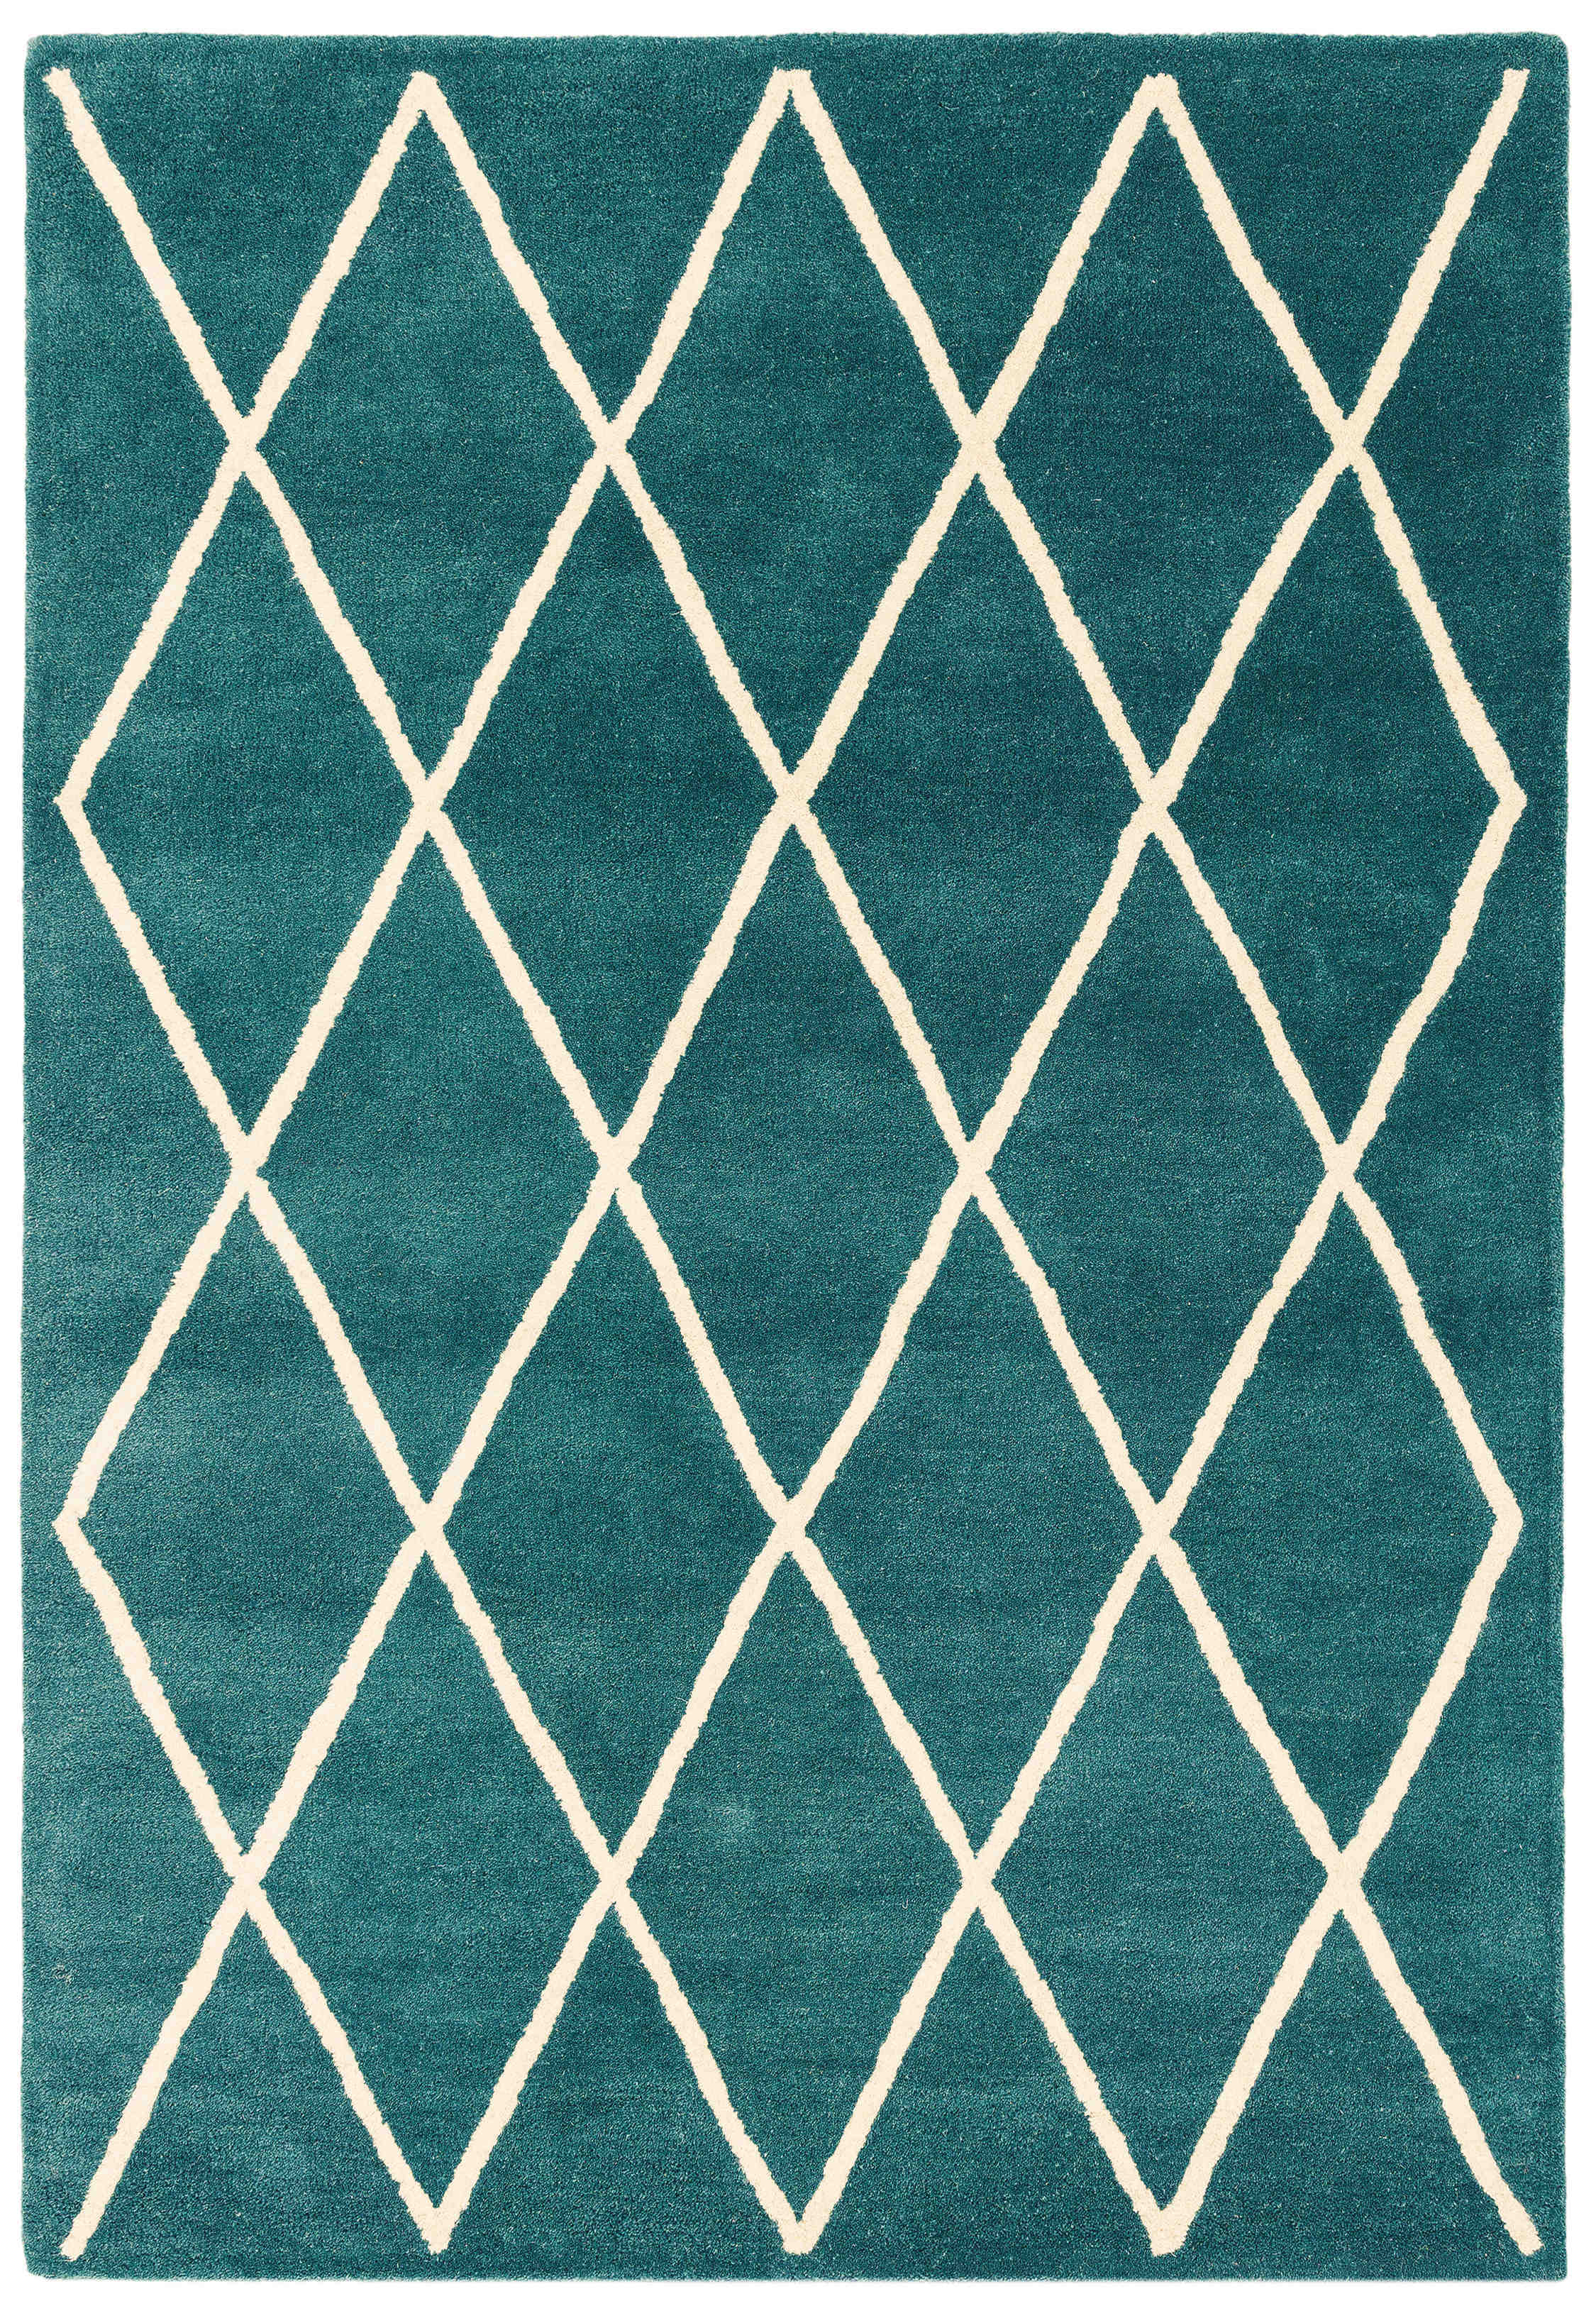 teal green geometric rug with a moroccan berber design